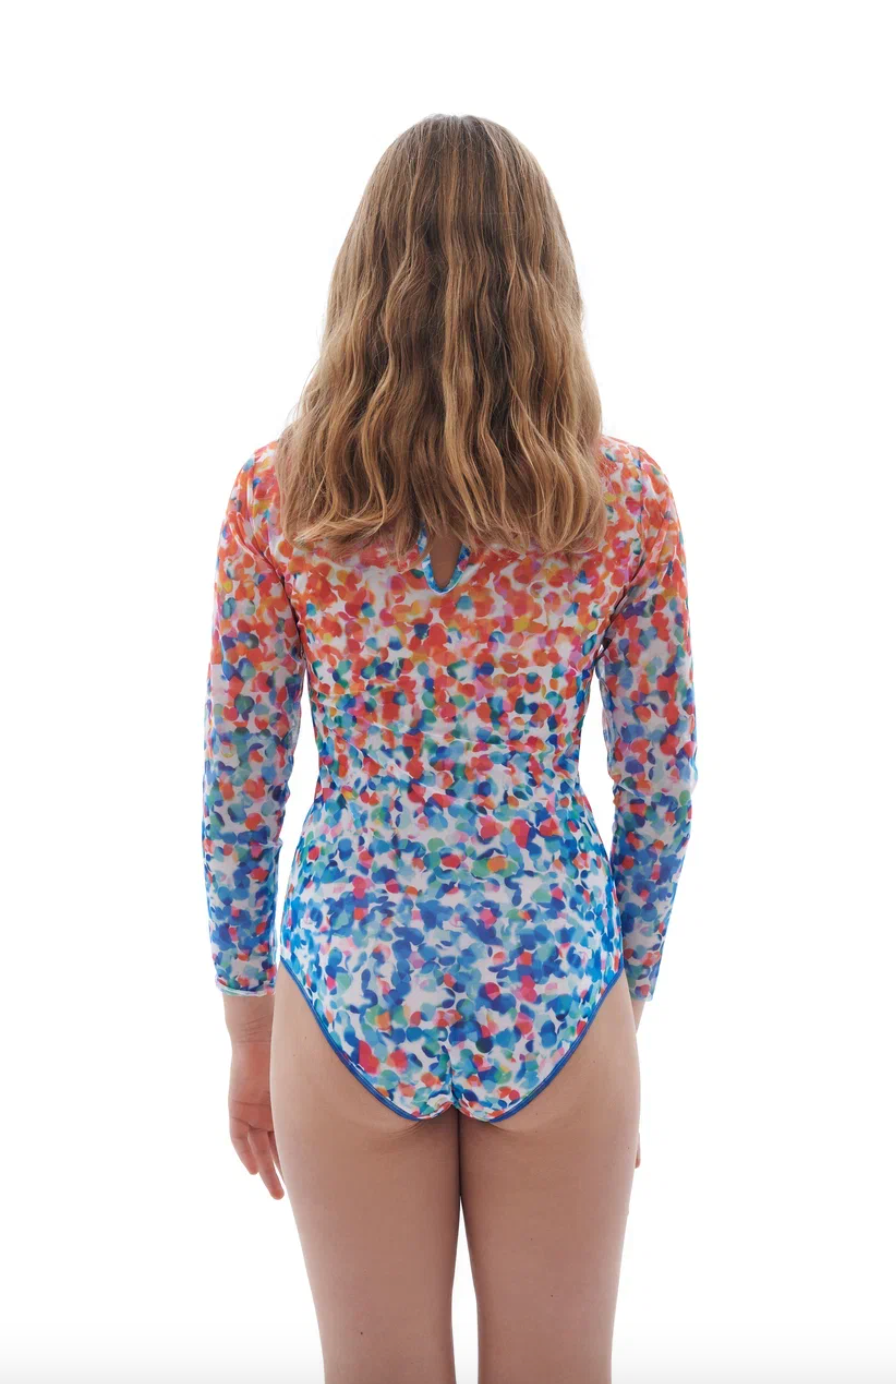 Explore our Confetti print kids swimsuits with sleeves, offering SPF35 protection for added safety. Designed for classic luxury and comfort, these eco-friendly swimsuits ensure your child enjoys stylish and safe beachwear. Shop now!